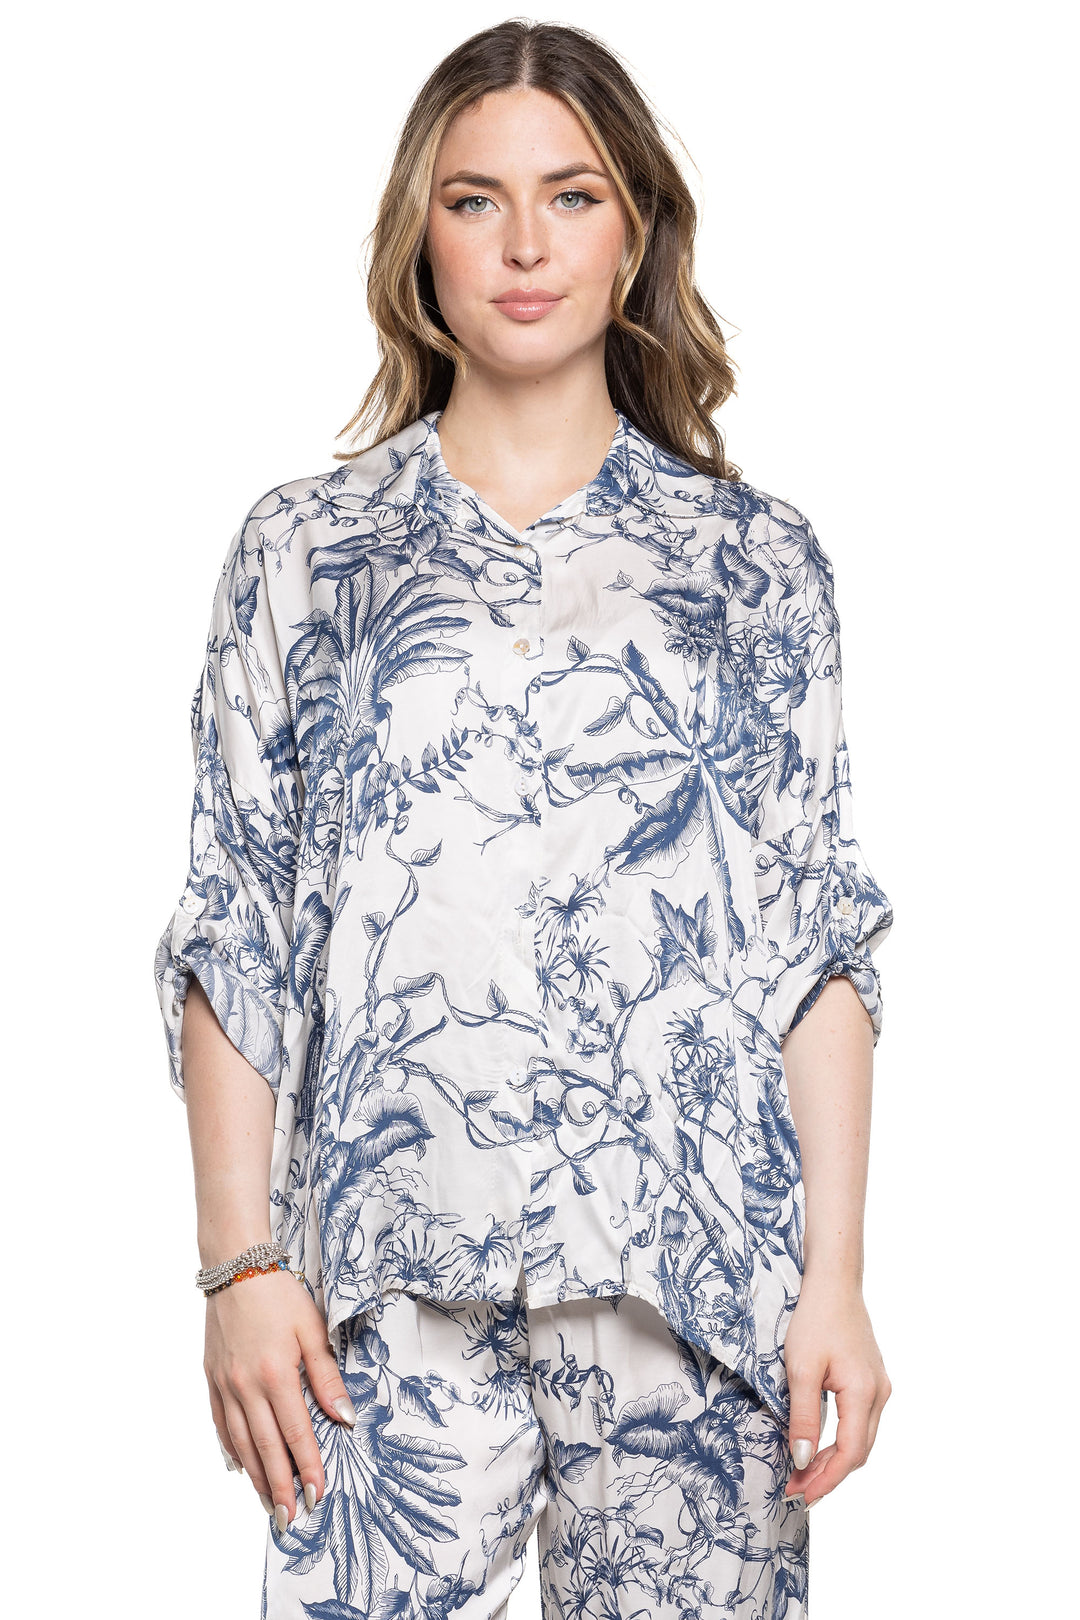 Etern Elle Summer 2024 Tie it up for a cool look that exudes style and versatility. Perfect for any occasion, this tropical blouse offers both comfort and new fashion-forward elements.